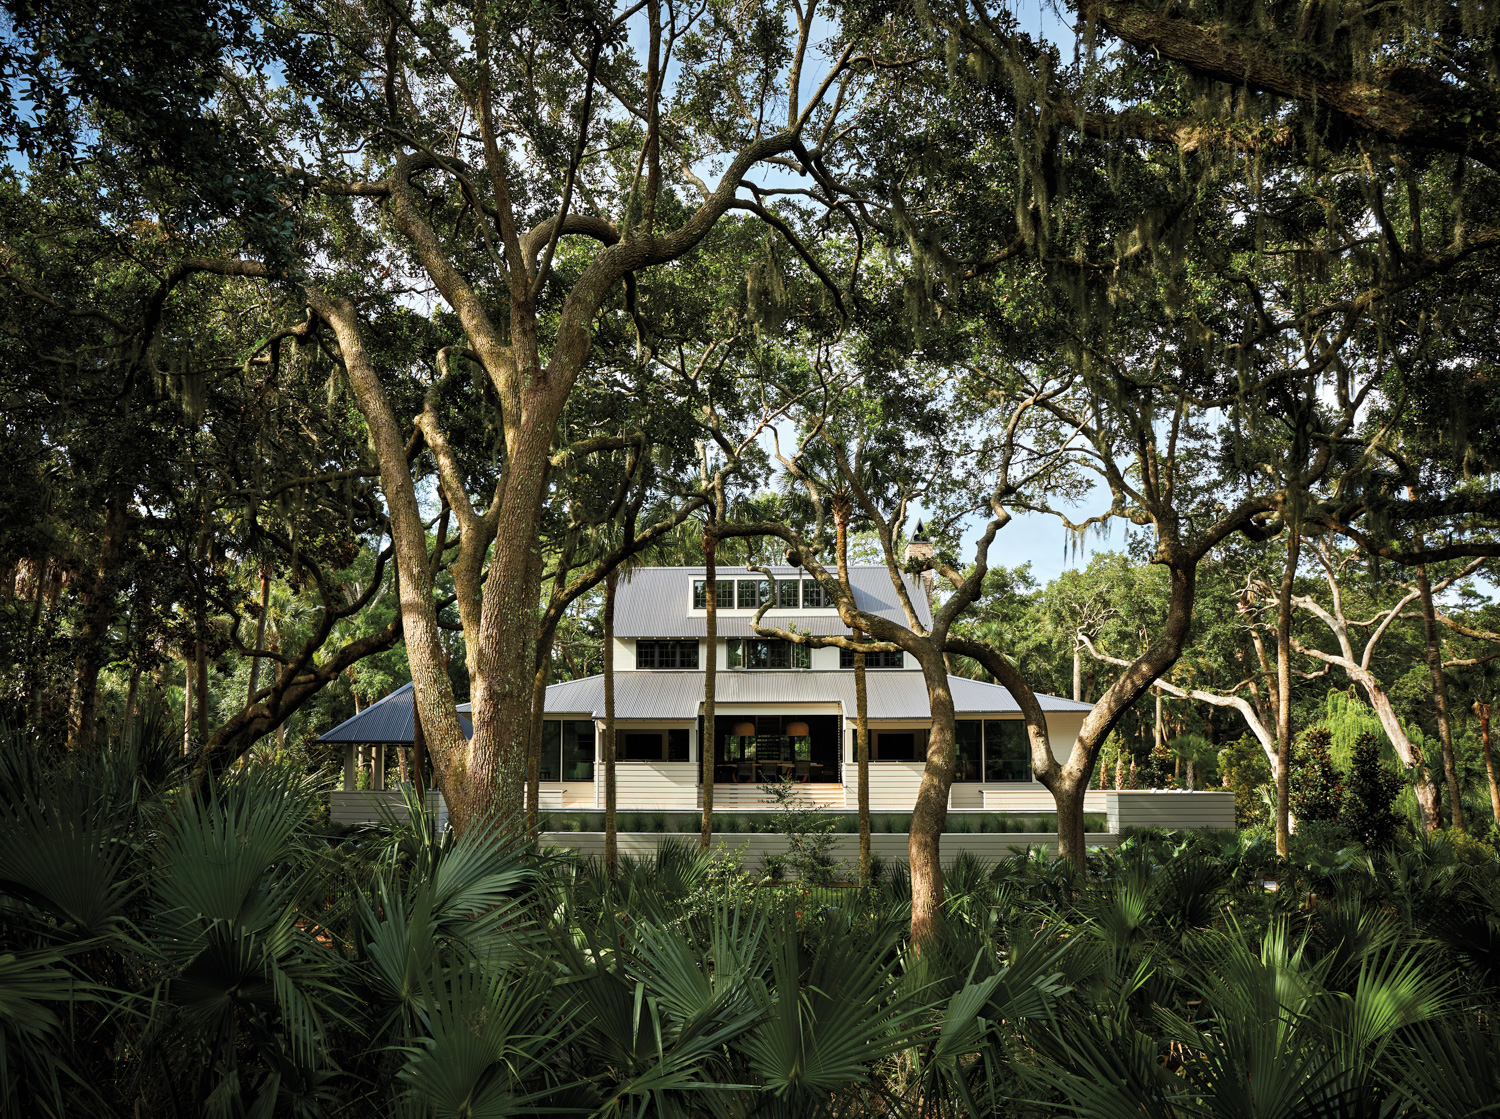 Lowcountry residence surrounded by live oaks and palmettos